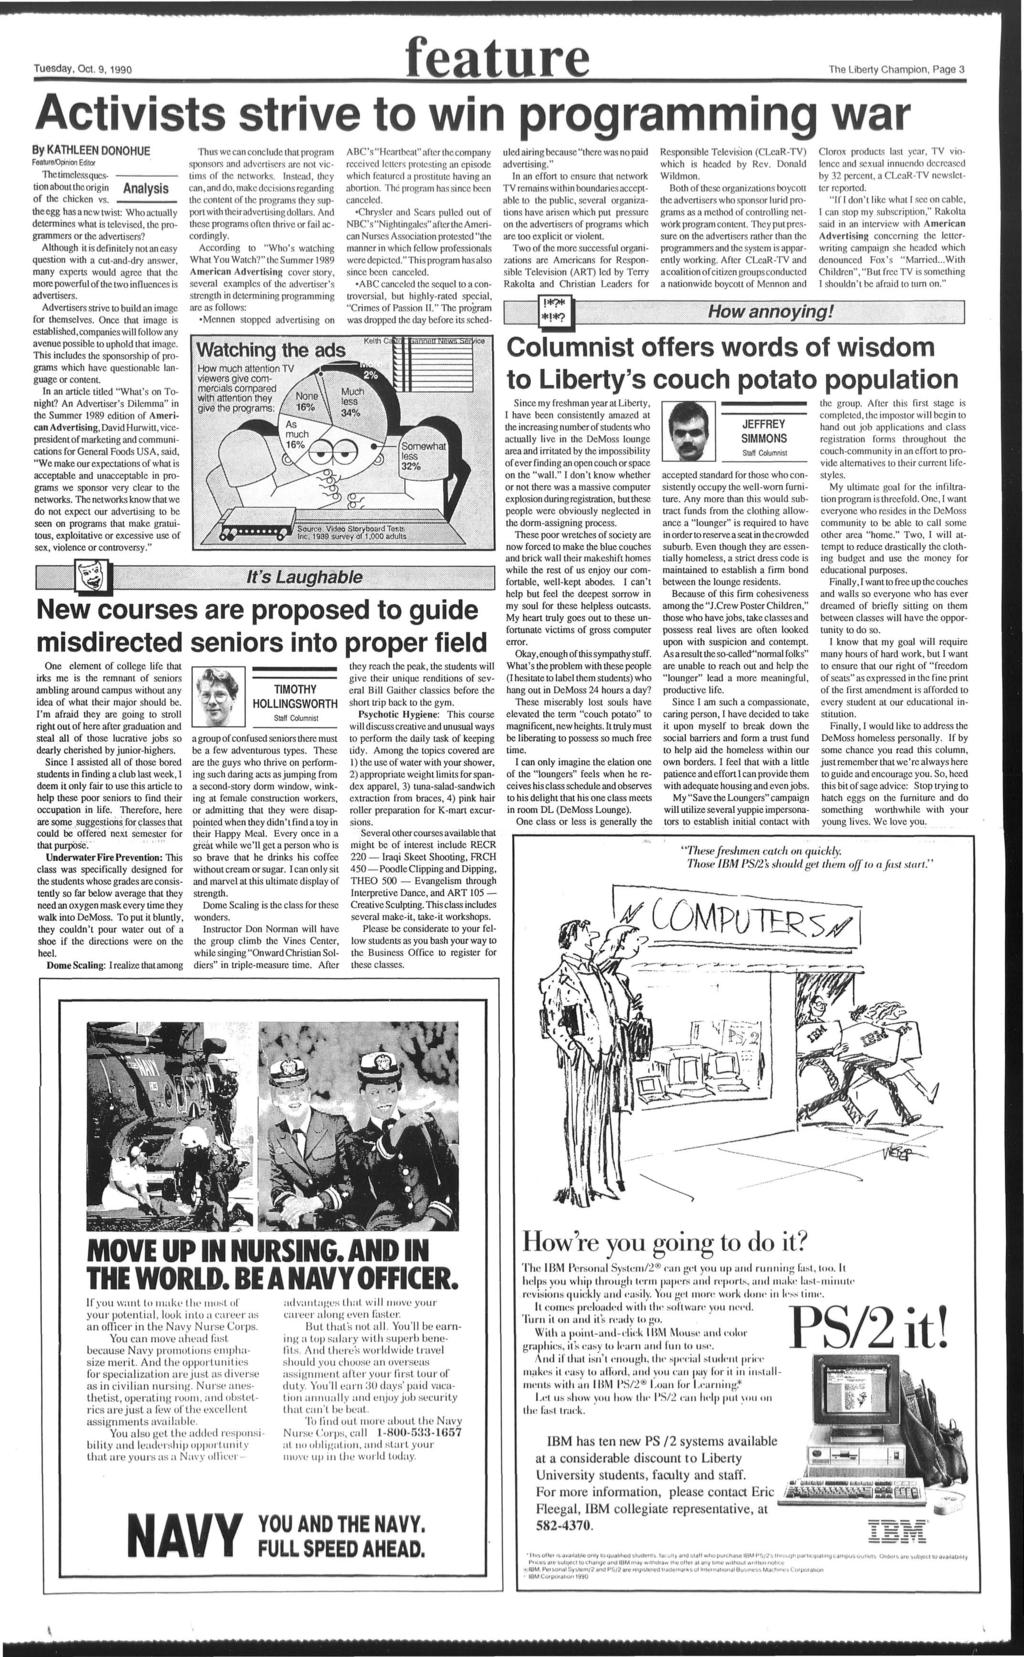 Tuesday, Oct. 9,1990 feature The Lberty Champon, Page 3 Actvsts strve to wn programmng war By KATHLEEN DONOHUE Feature/Opnon Edtor The tmeless queston about the orgn Analyss of the chcken vs.